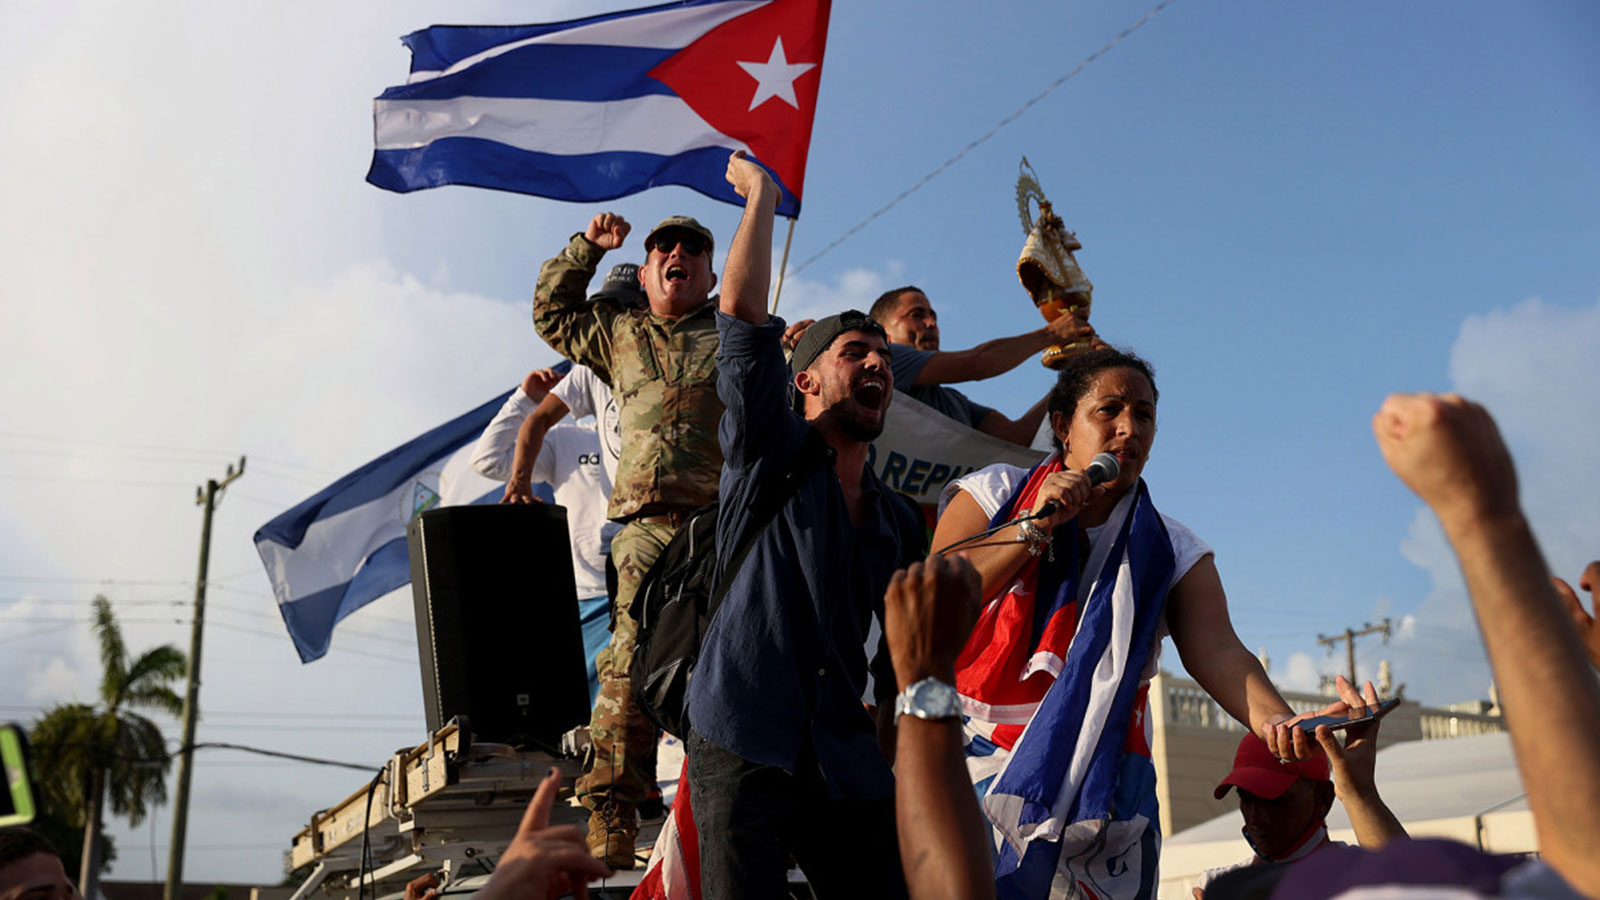 The hidden hand of the US blockade sparks Cuba protests